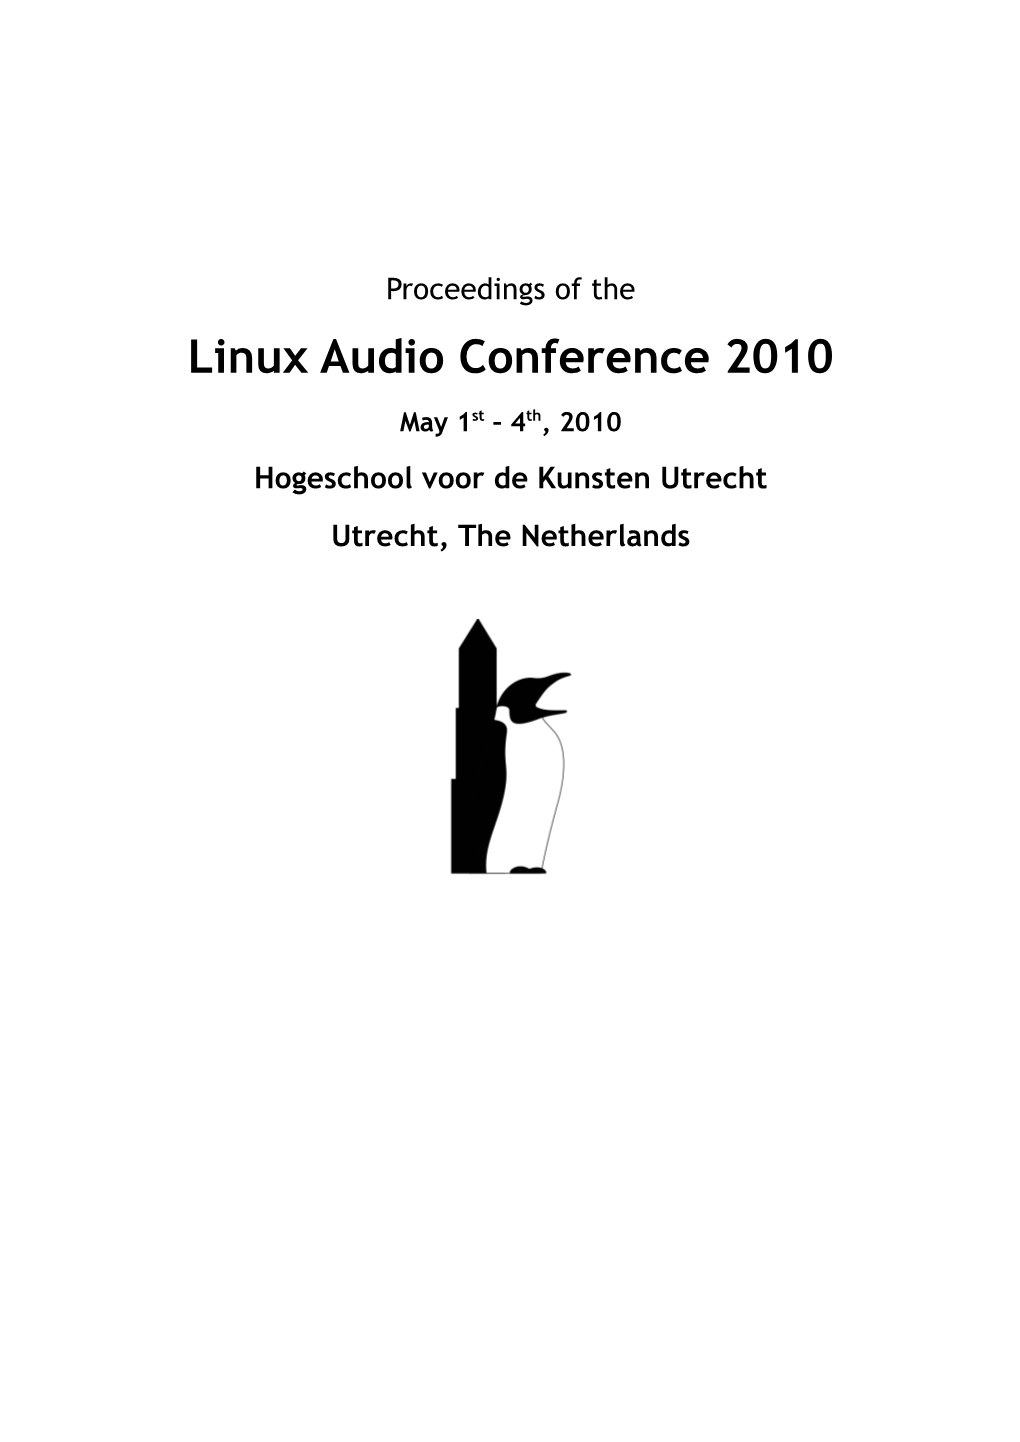 Linux Audio Conference 2010